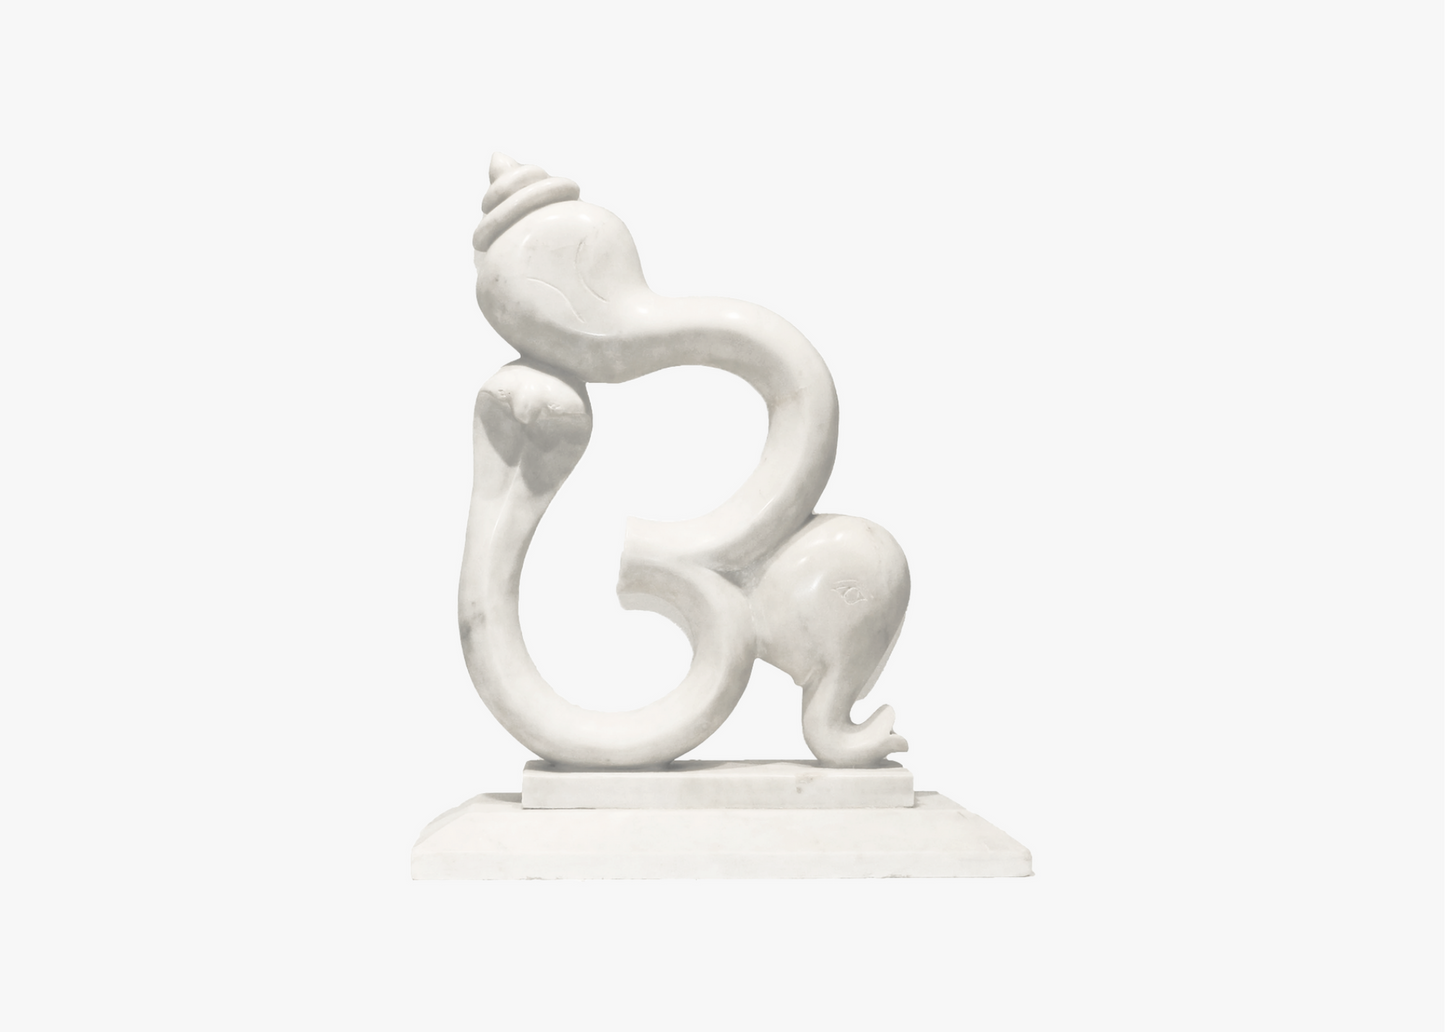 Abstract Om Ganesh - White Marble (57cm)